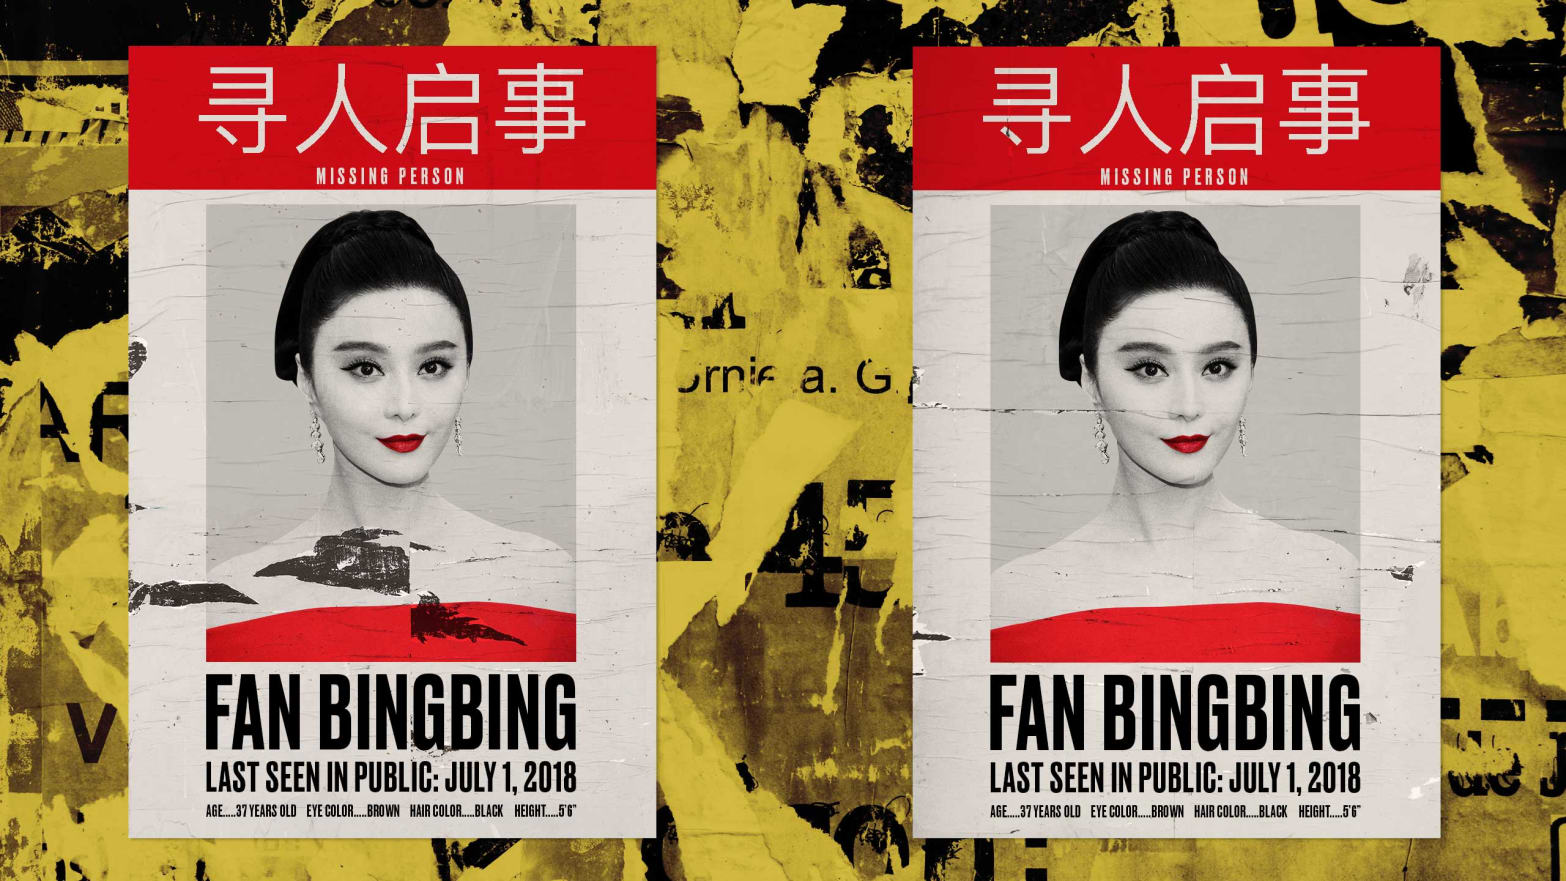 Garanti Turbulens absorberende The Vengeful Celebrity Who Helped Disappear Fan Bingbing, China's Biggest  Actress: 'It's War'